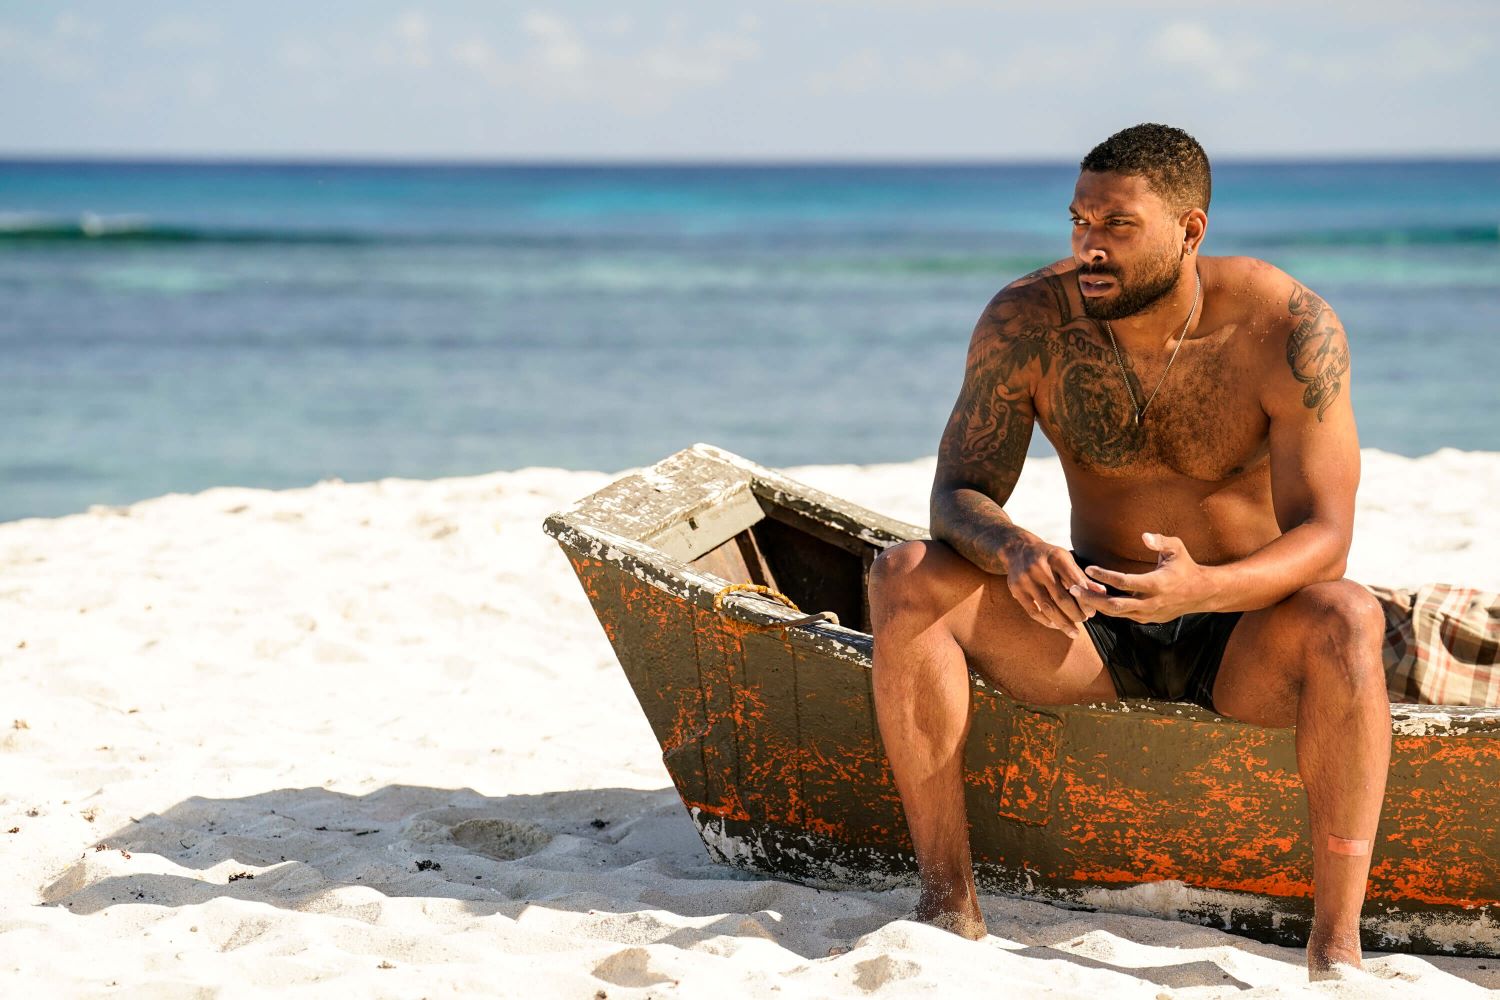 Brandon Cottom, who is competing in 'Survivor' Season 44 on CBS,